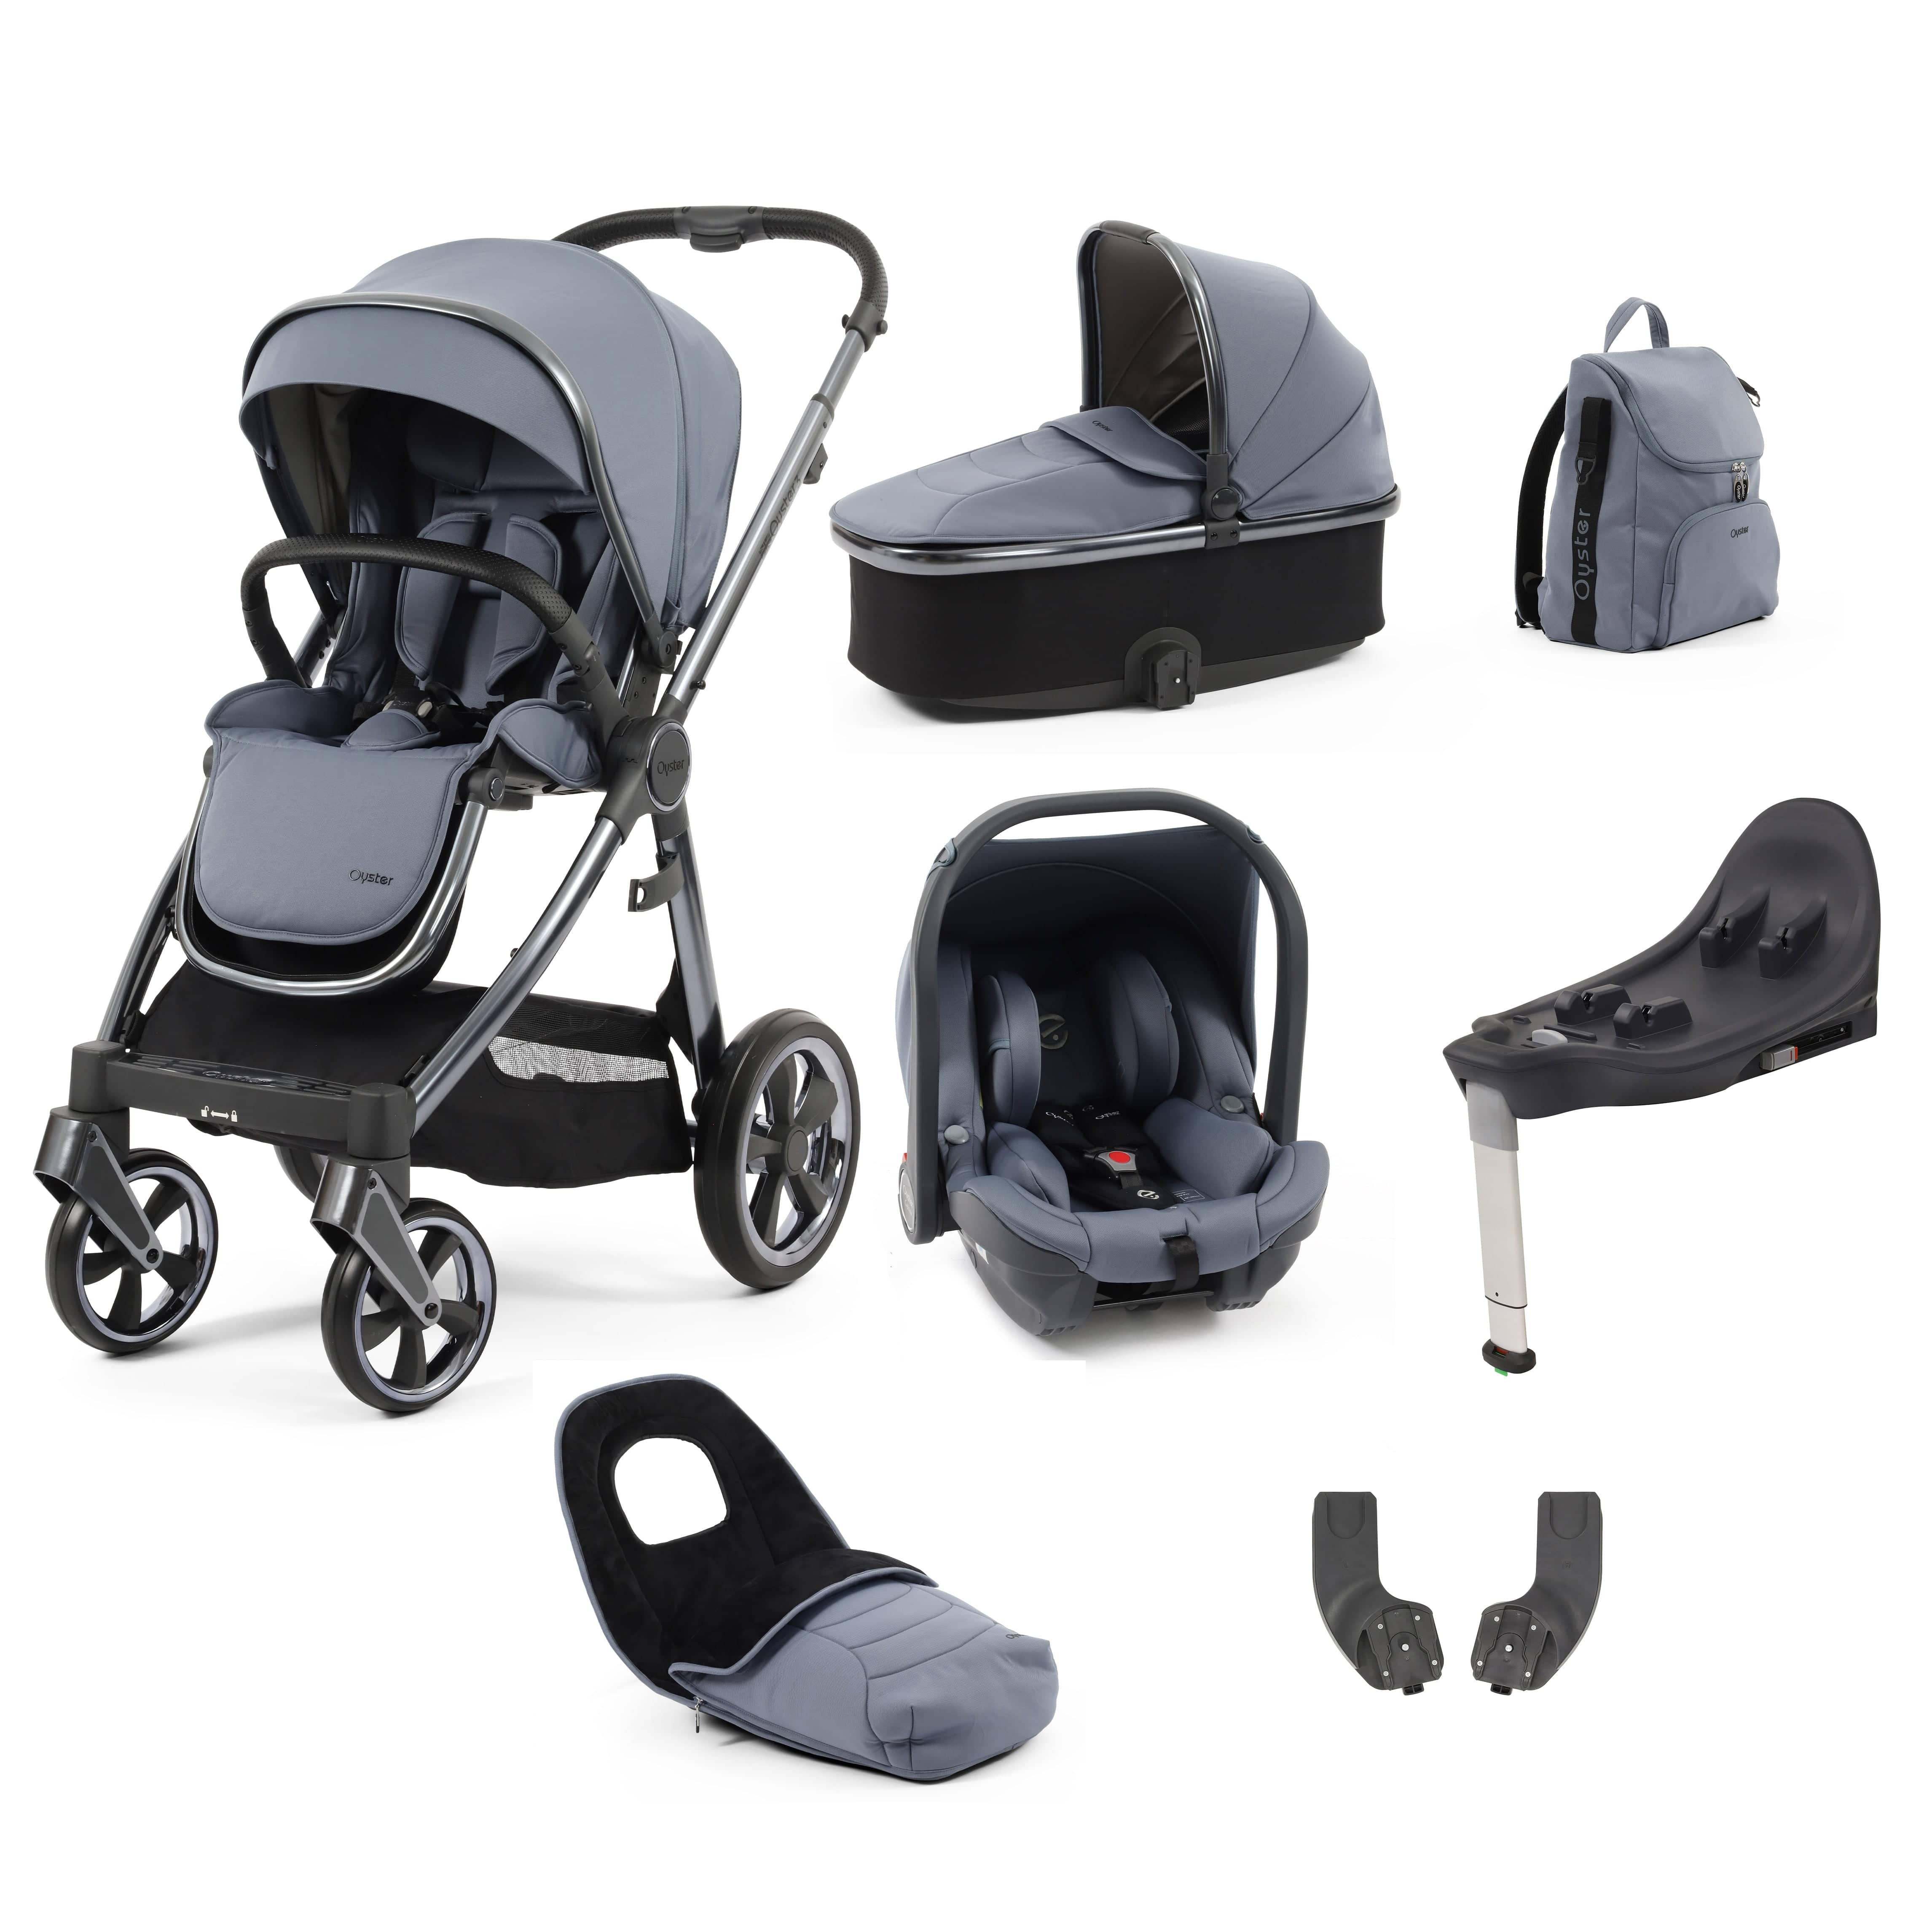 BabyStyle travel systems Babystyle Oyster 3 Luxury 7 Piece with Car Seat Bundle in Dream Blue 14772-DMB